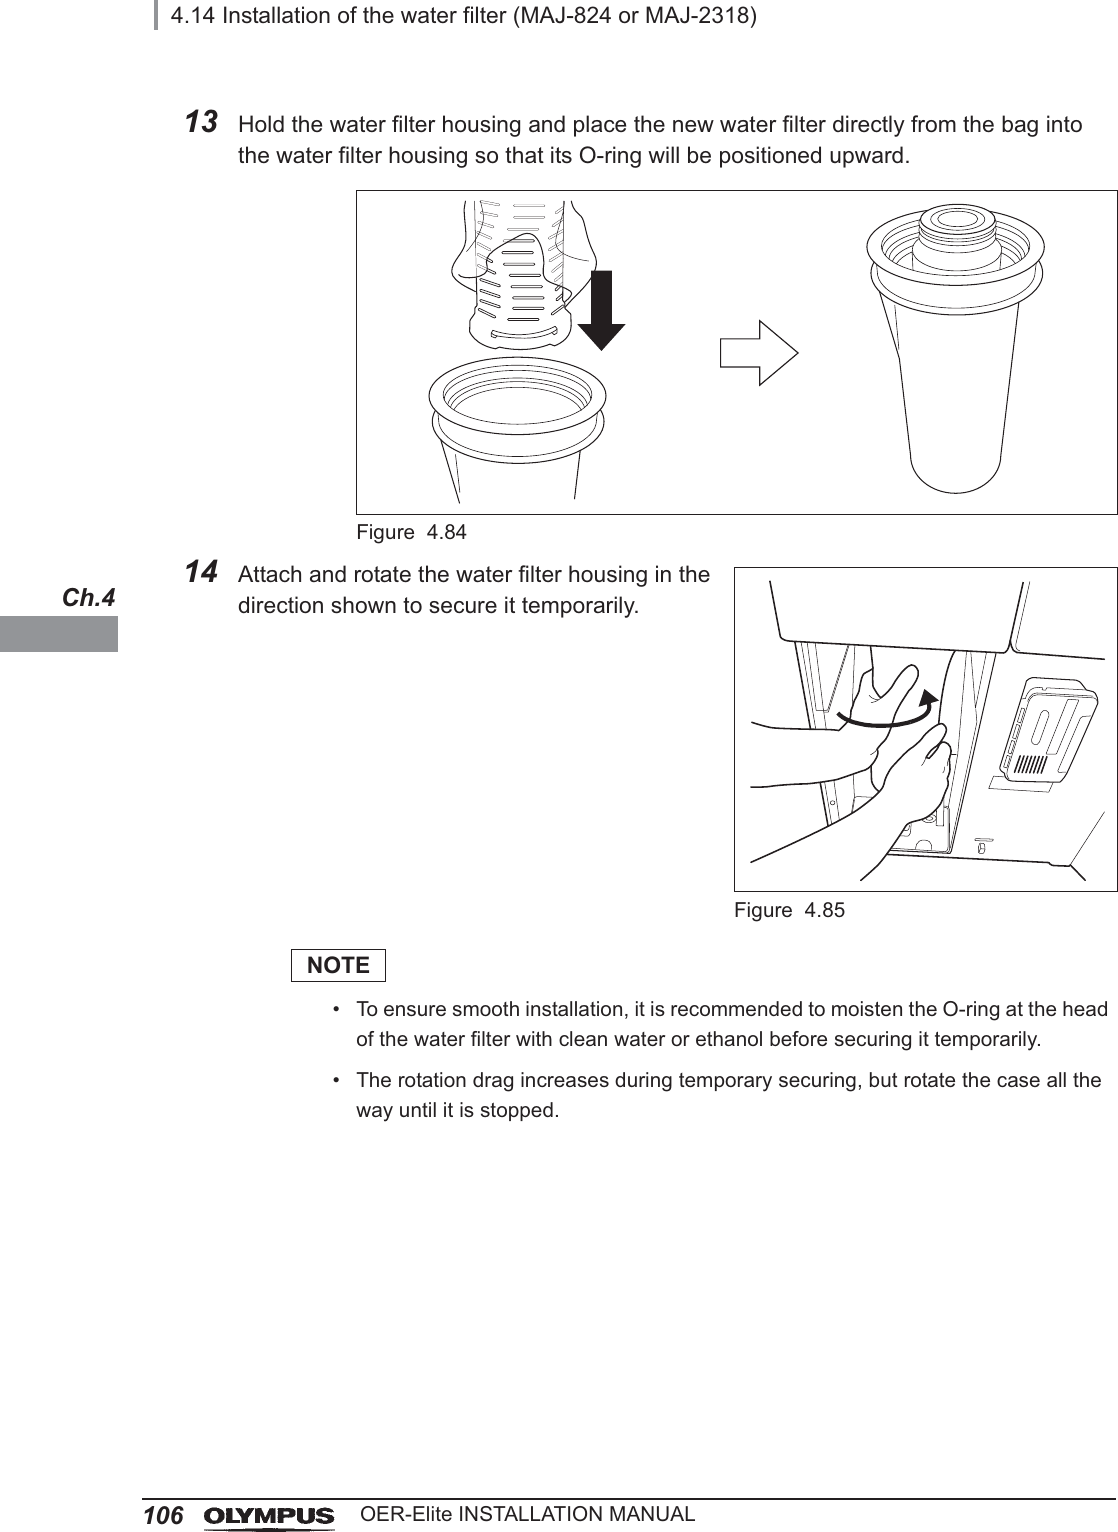 1064.14 Installation of the water filter (MAJ-824 or MAJ-2318)OER-Elite INSTALLATION MANUALCh.413 Hold the water filter housing and place the new water filter directly from the bag into the water filter housing so that its O-ring will be positioned upward.Figure 4.8414 Attach and rotate the water filter housing in the direction shown to secure it temporarily.Figure 4.85NOTE• To ensure smooth installation, it is recommended to moisten the O-ring at the head of the water filter with clean water or ethanol before securing it temporarily.• The rotation drag increases during temporary securing, but rotate the case all the way until it is stopped.